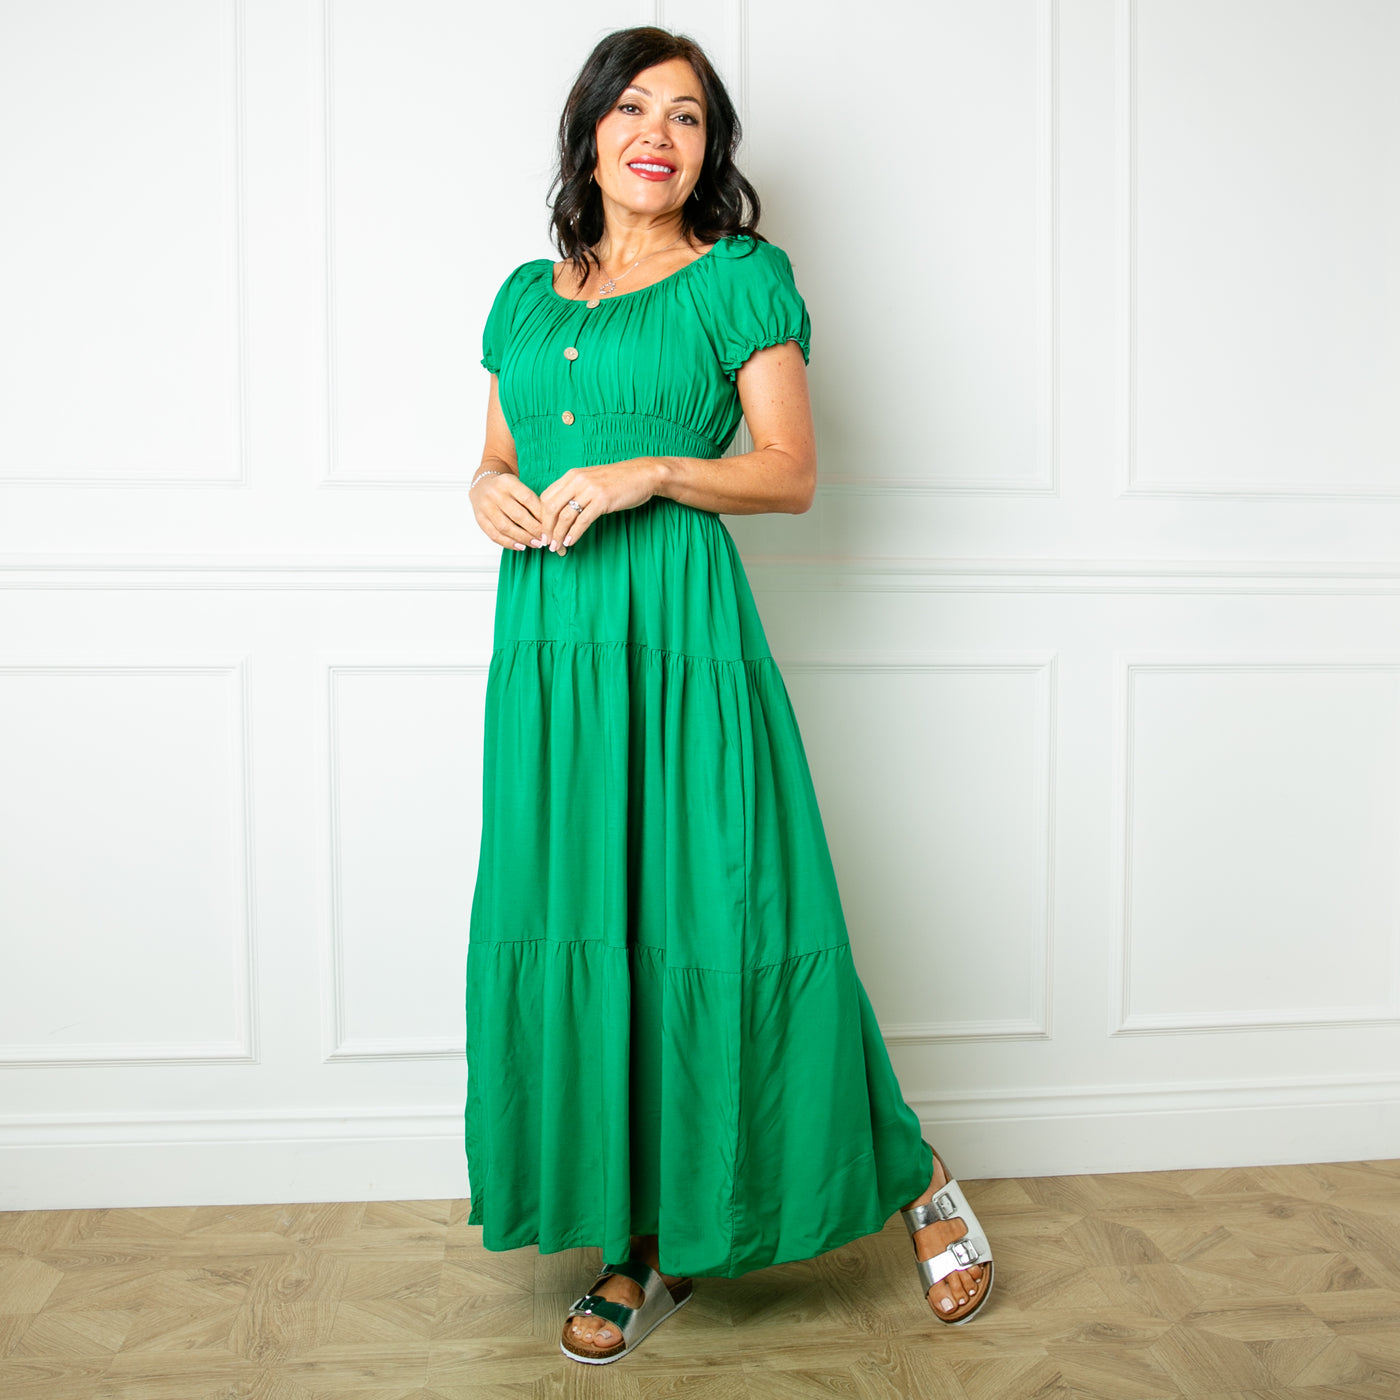 The Button Front Maxi Dress in emerald green with button detailing down the front and a shirred elasticated stretchy waistband 